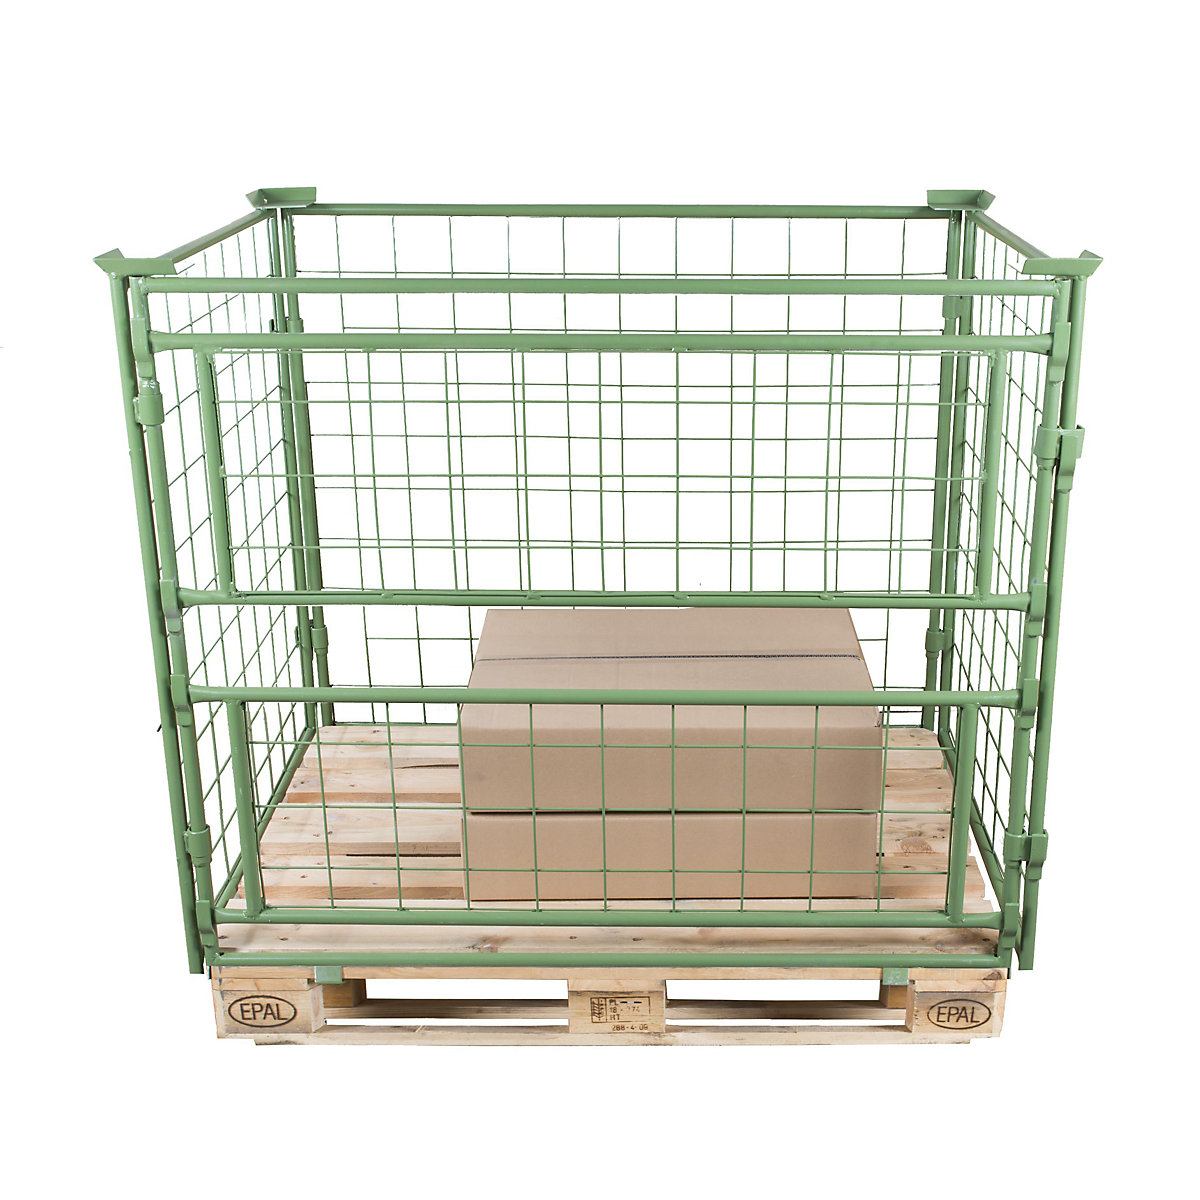 Pallet frame, effective height 1800 mm, for stacking, WxL 800 x 1200 mm, 1 long side with 2 parts, removable-1